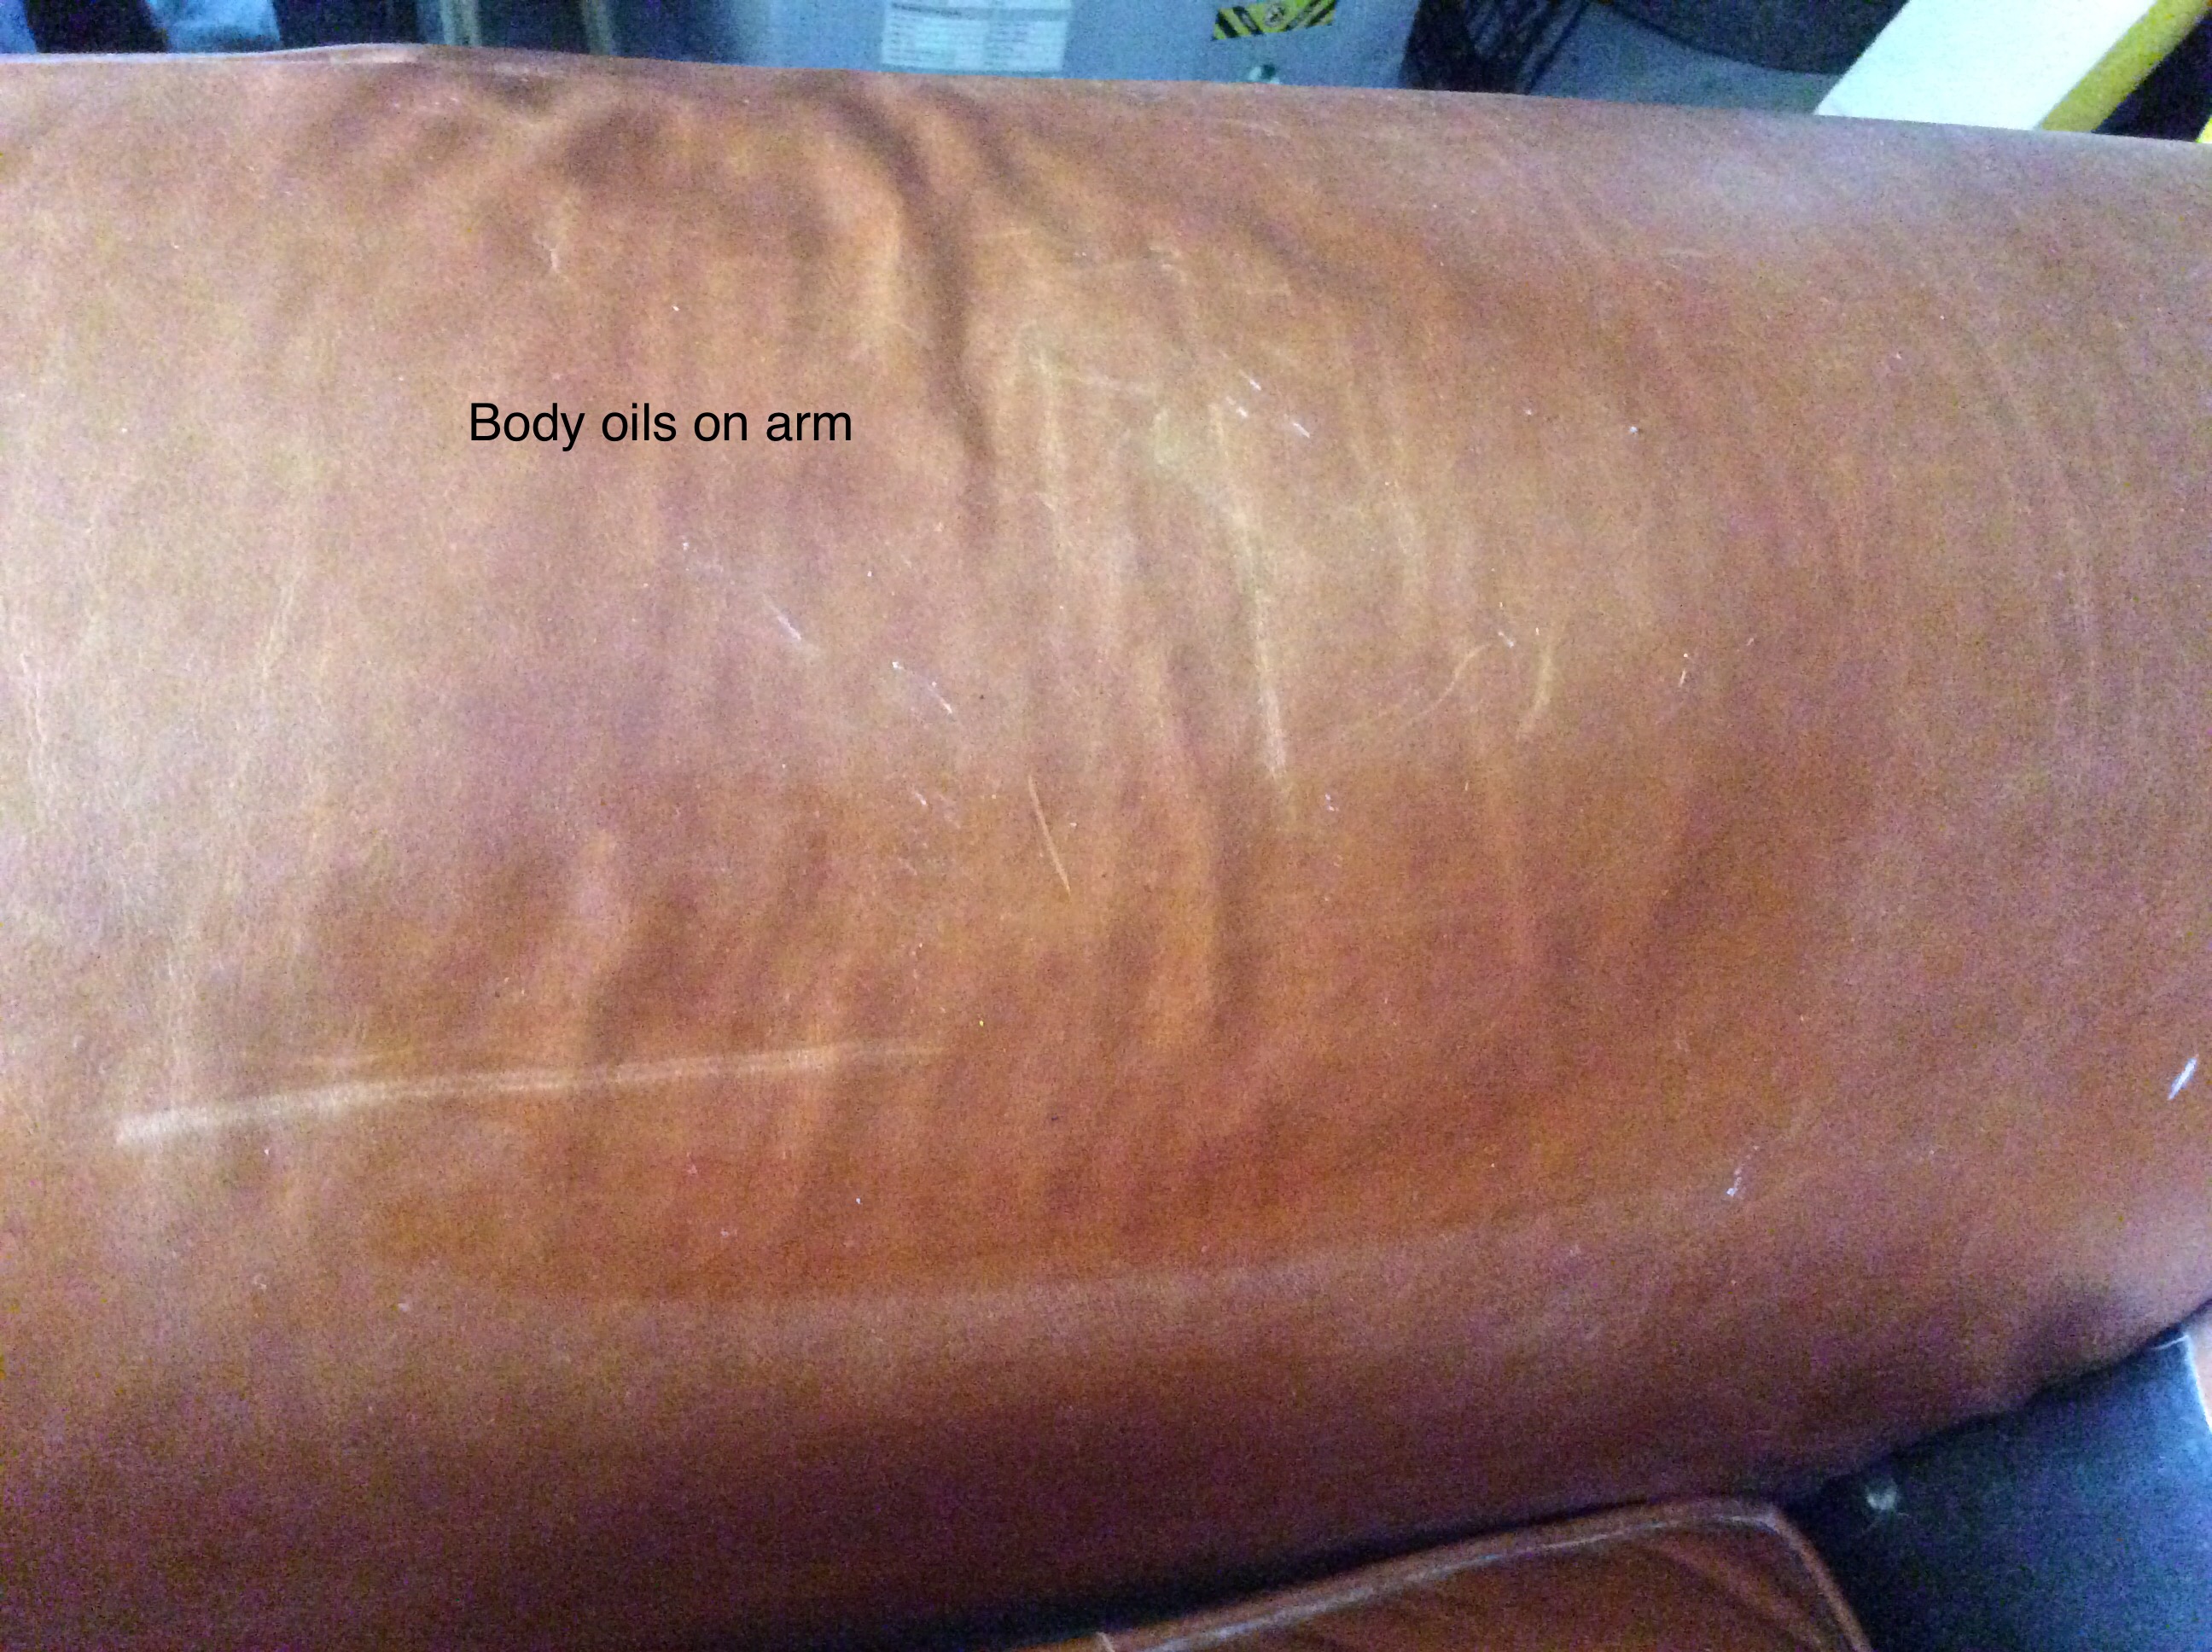 Stains and body oil on aniline or semi-aniline leather chair